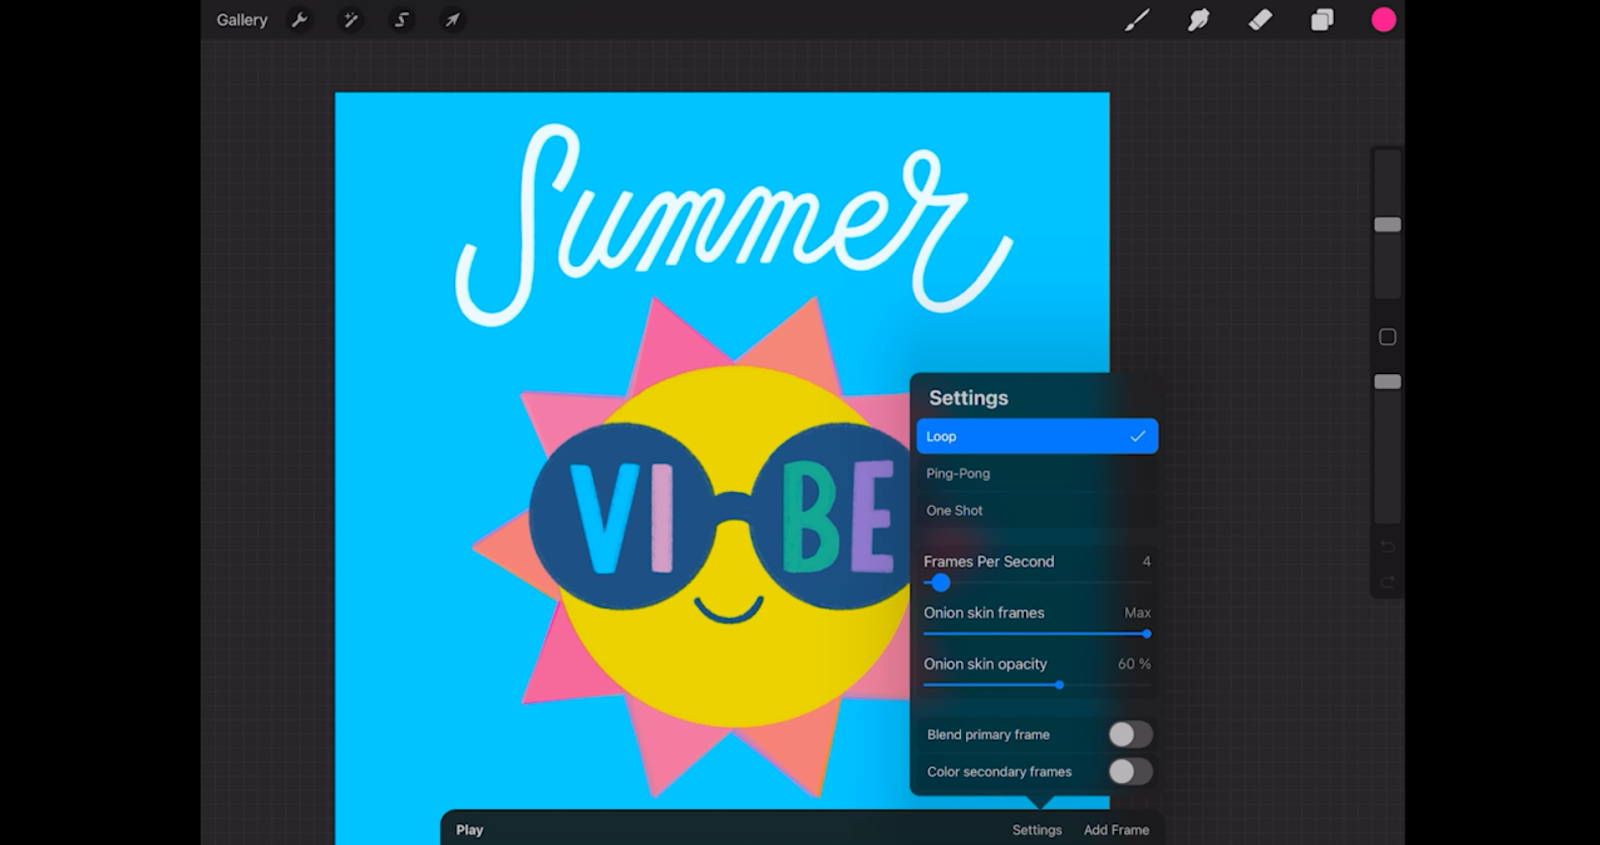 A beginners guide to creating GIFs with Procreate! 